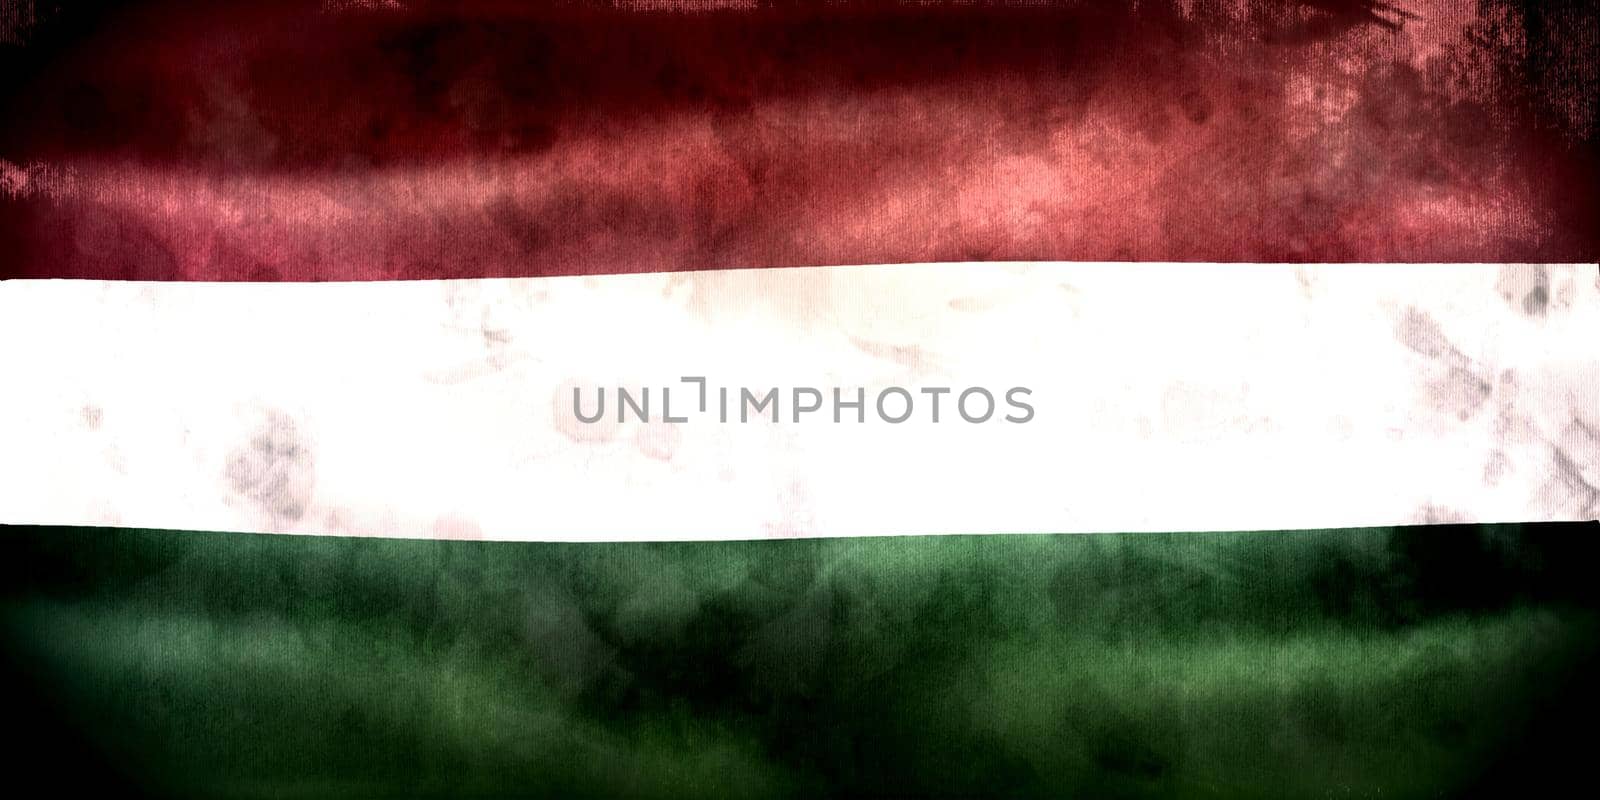 3D-Illustration of a Hungary flag - realistic waving fabric flag by MP_foto71